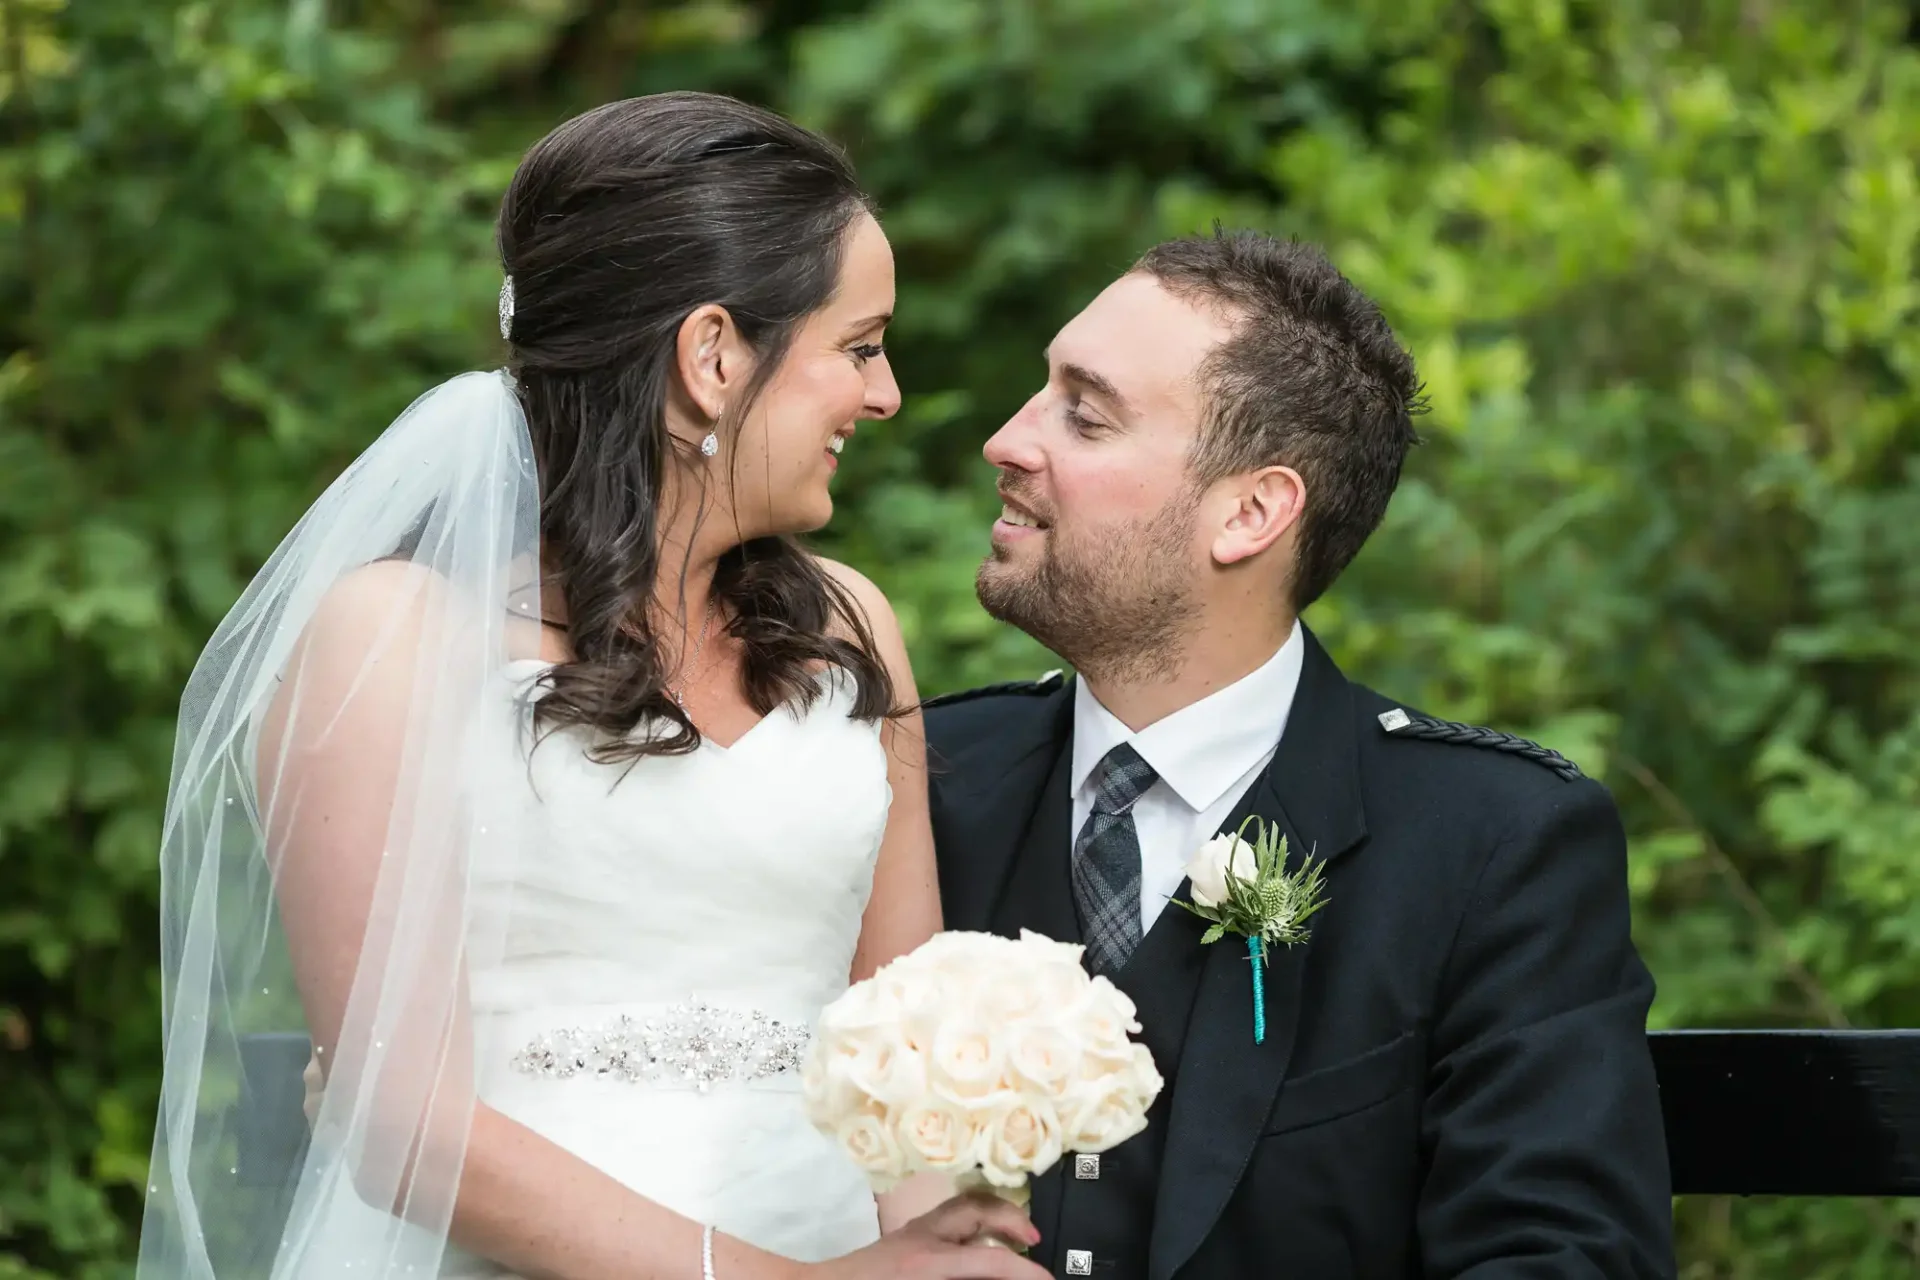 A newlywed couple happily looking at each other, the bride in a white gown holding a bouquet and the groom in a black suit, outdoors with lush greenery in the background.